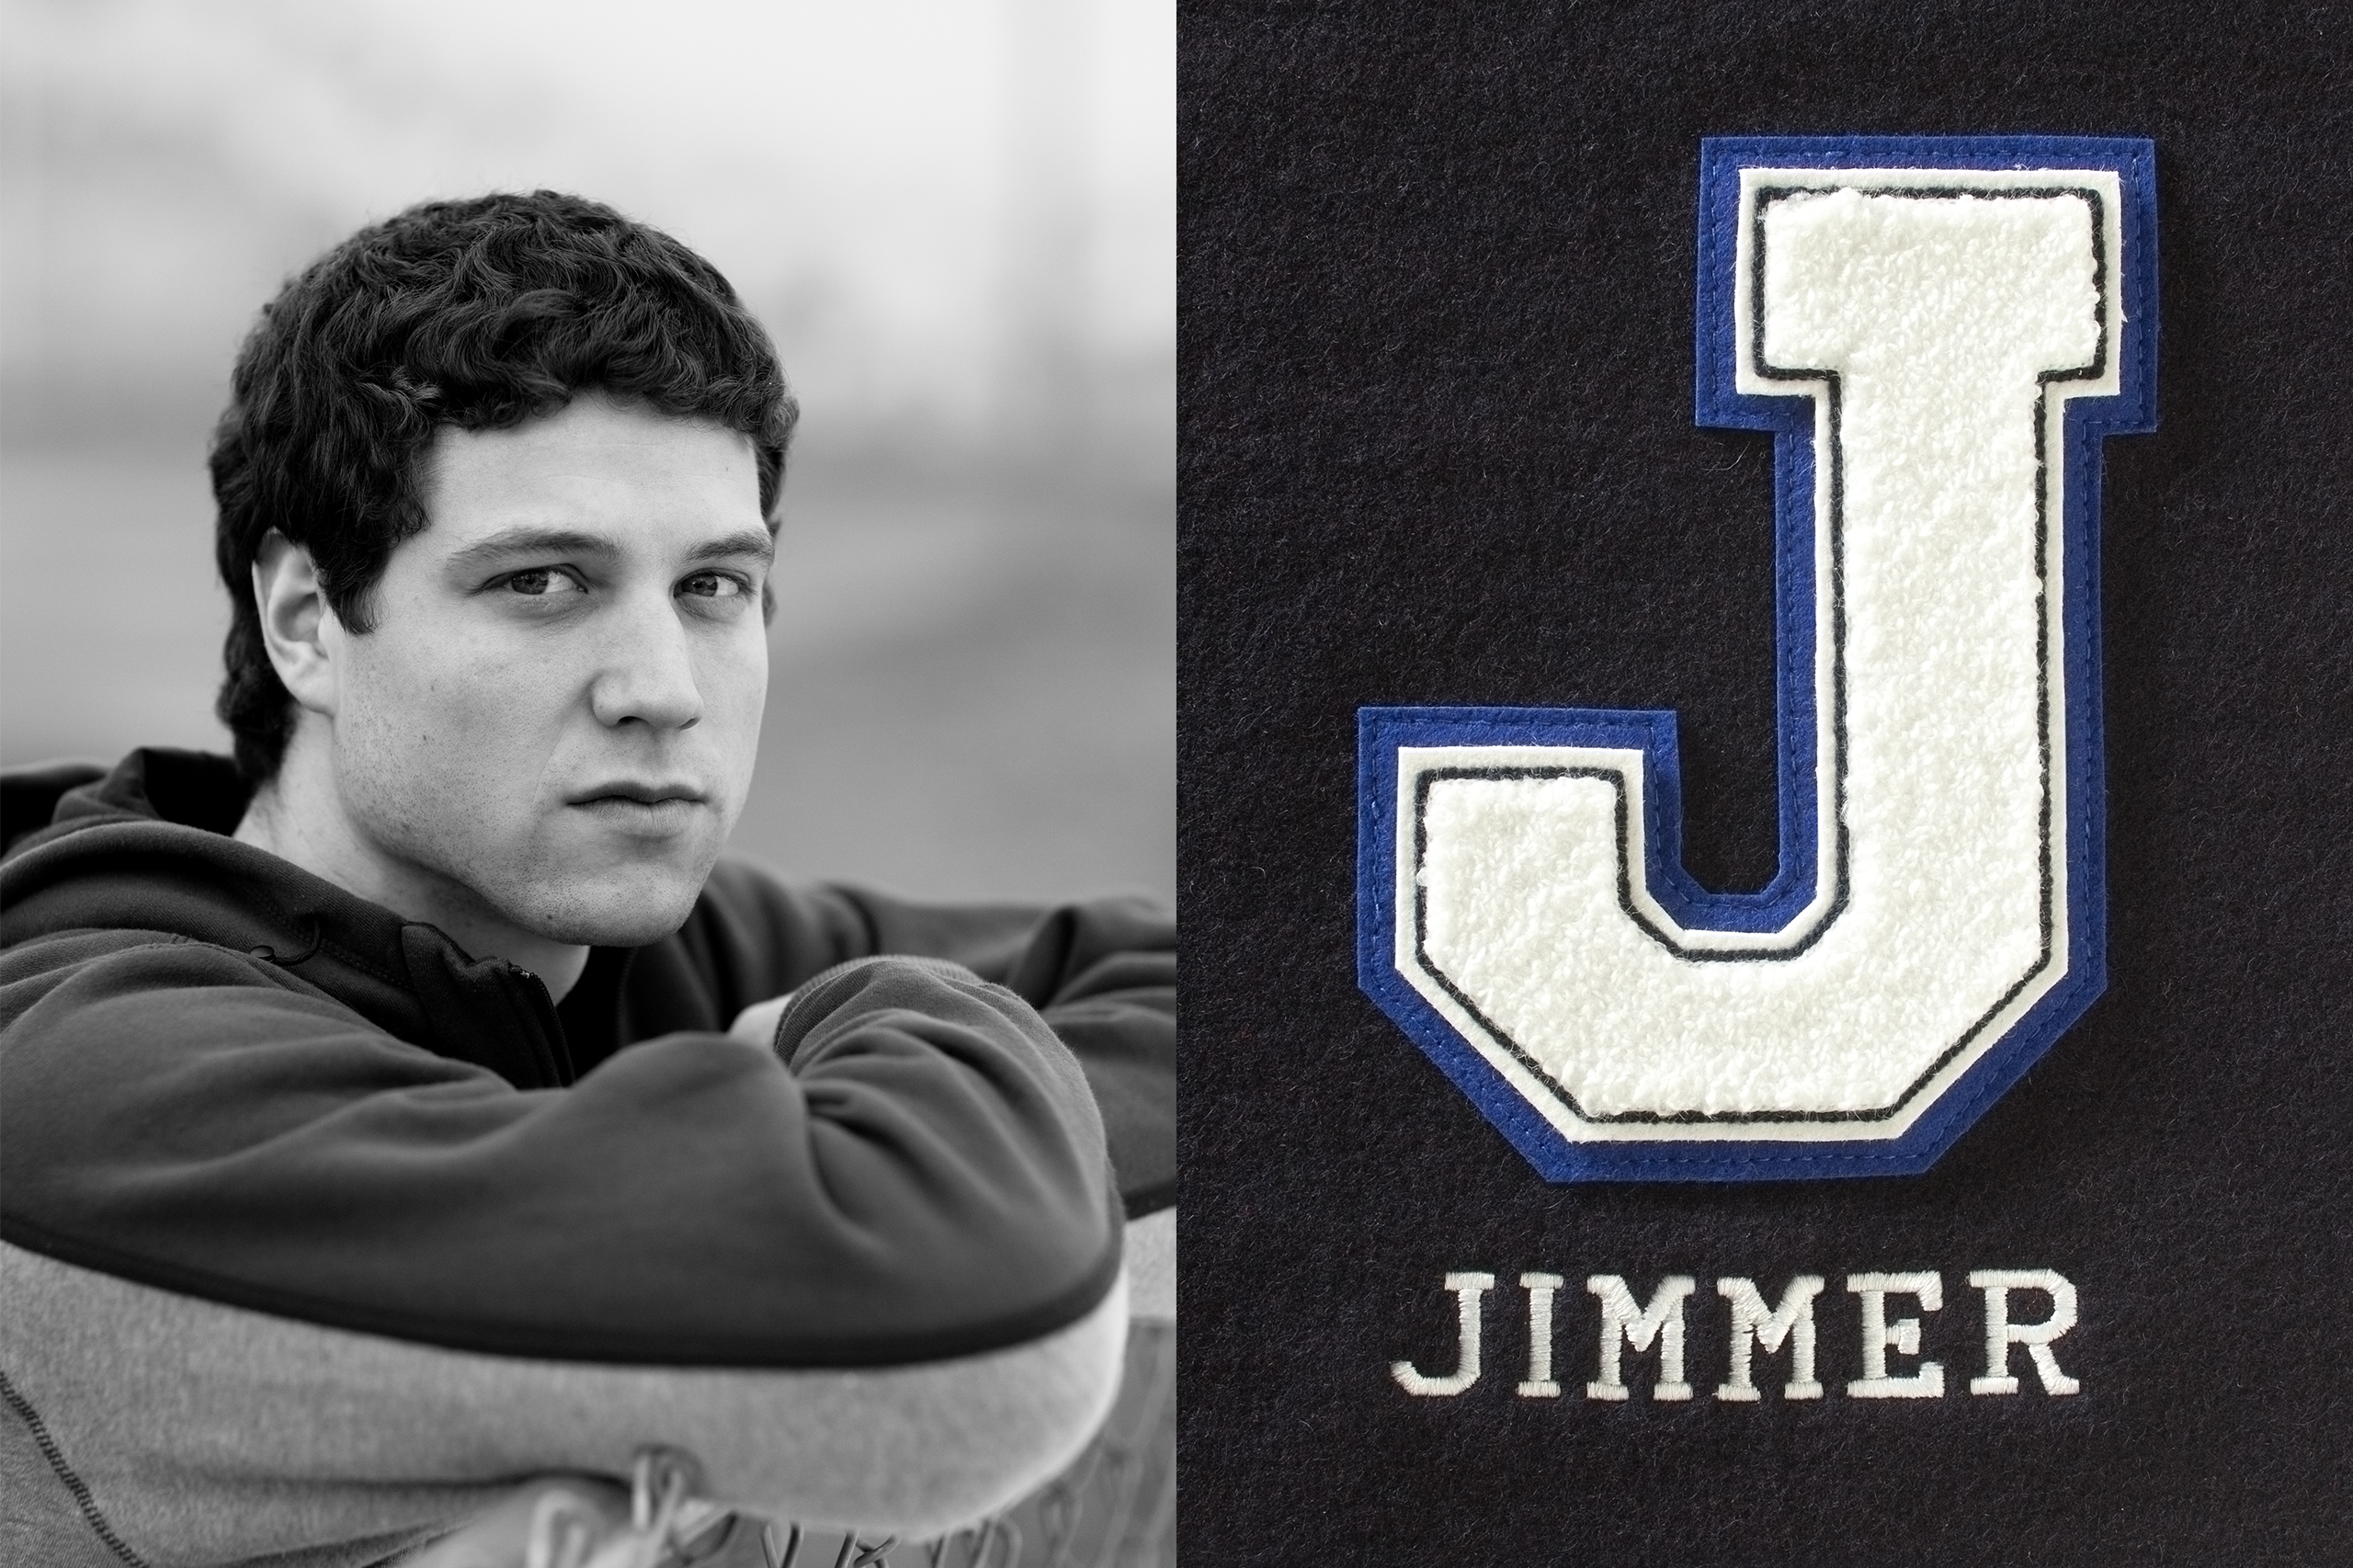 Jimmer poses with arms folded across from a letter-jacket style designed header featuring a large letter J and his name.